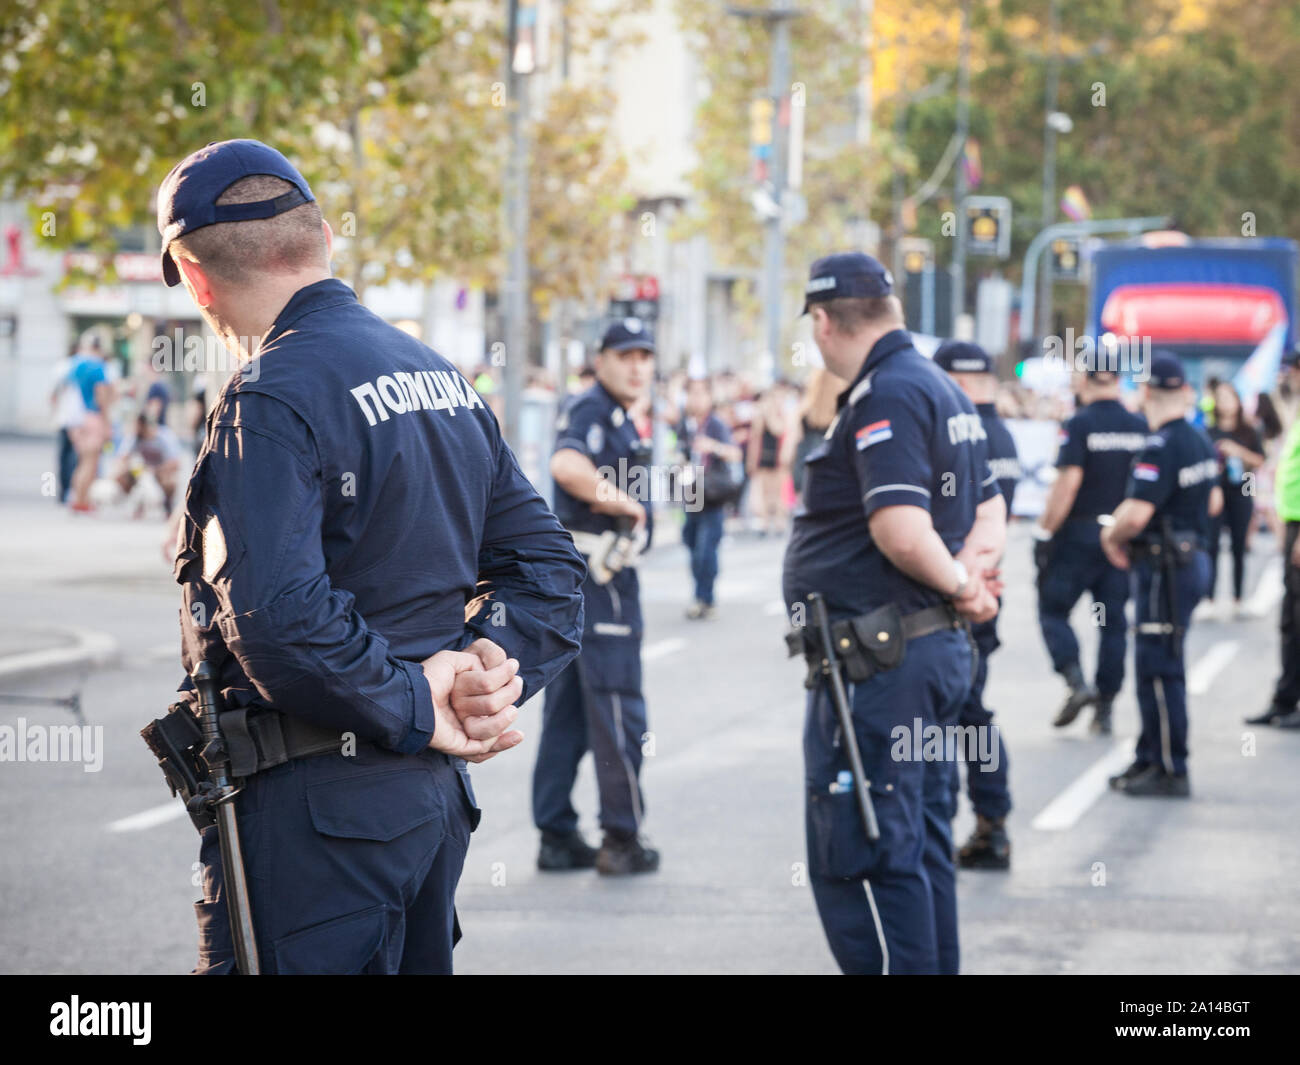 BELGRADE, SERBIA - SEPTEMBER 15, 2019: Serbian policemen protecting the 2019 Belgrade Gay Pride in the center of the capital city of Serbia, which hap Stock Photo